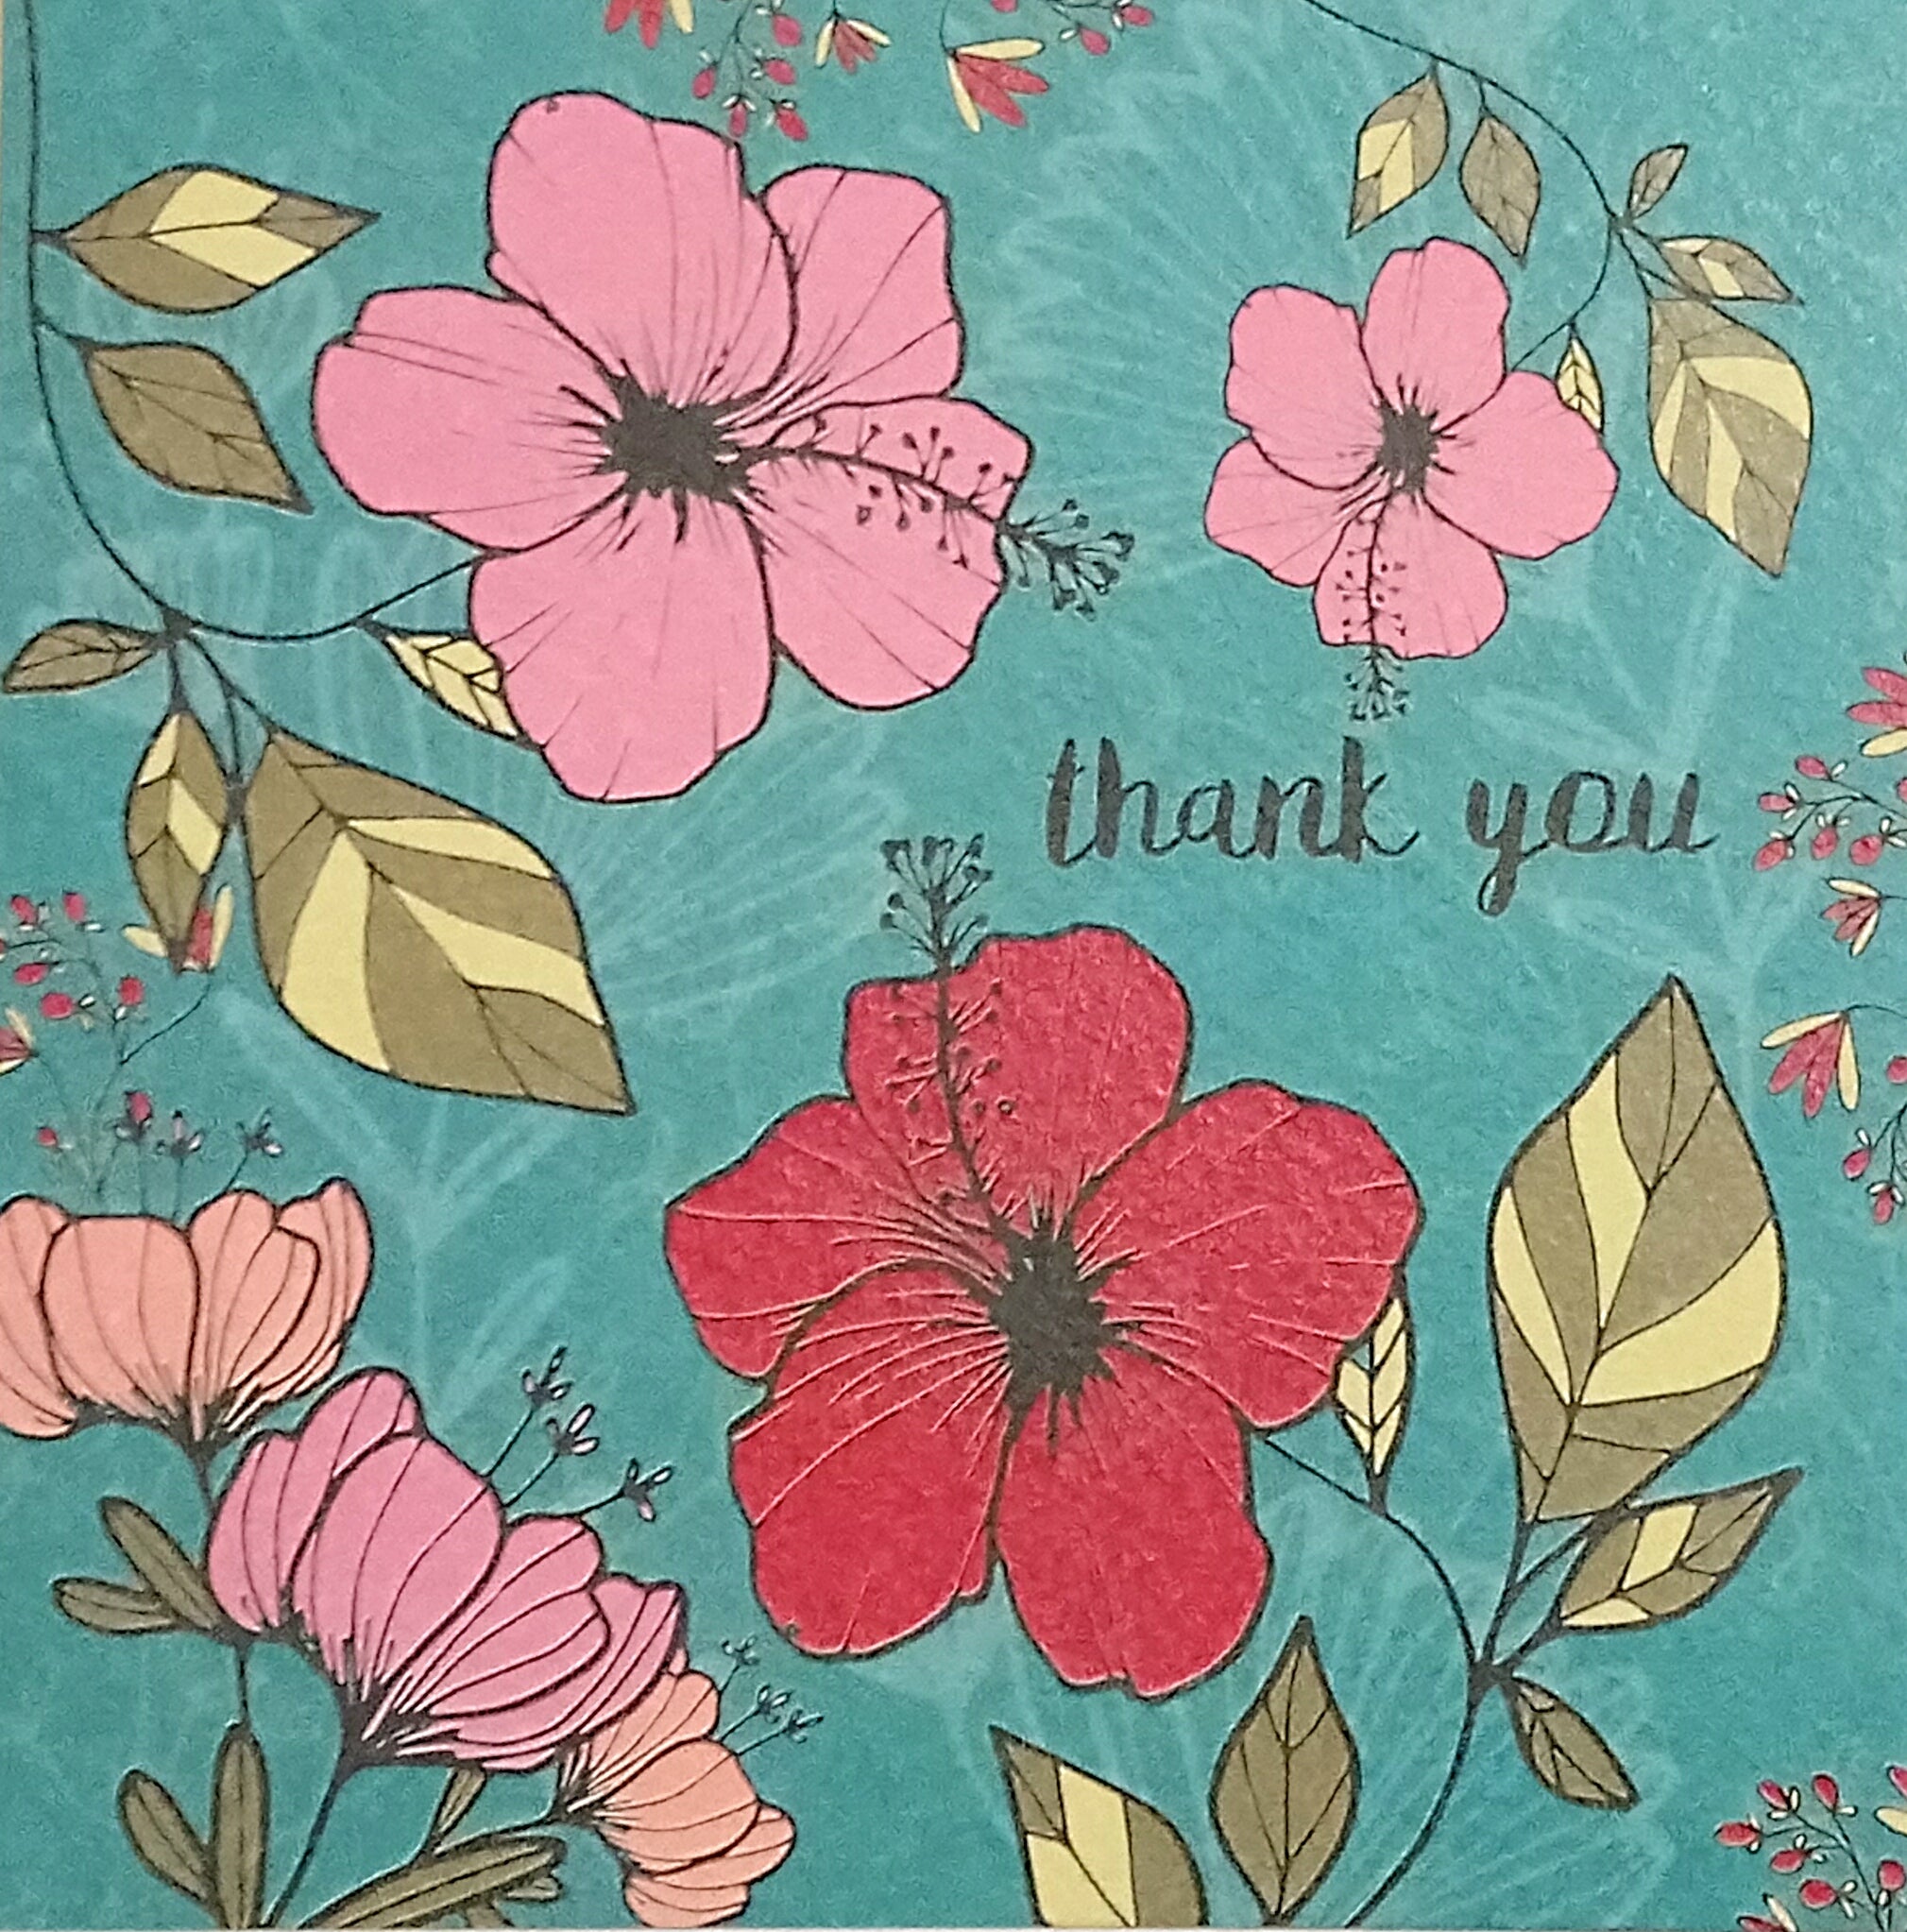 Thank You Cards designed by Ilana Ewing